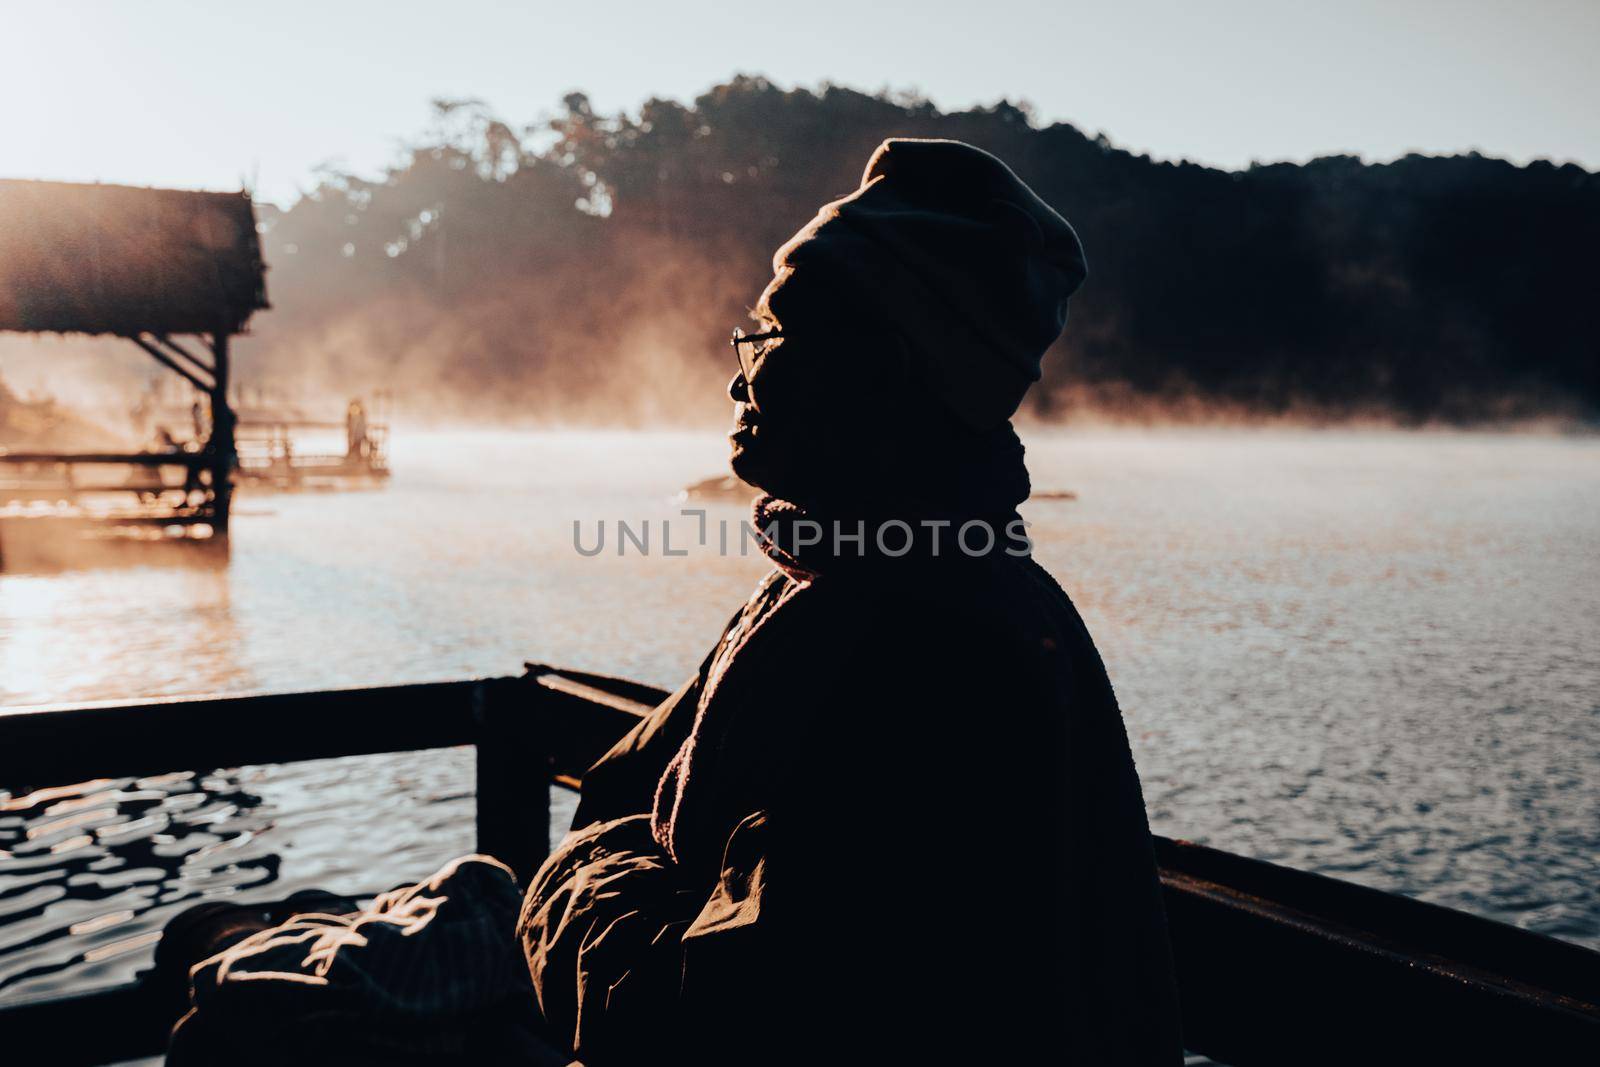 An Asian senior man enjoying the nature and the warm morning sun by the lake in winter. Elderly man relaxing in the park . Outdoor leisure lifestyle of the elderly.